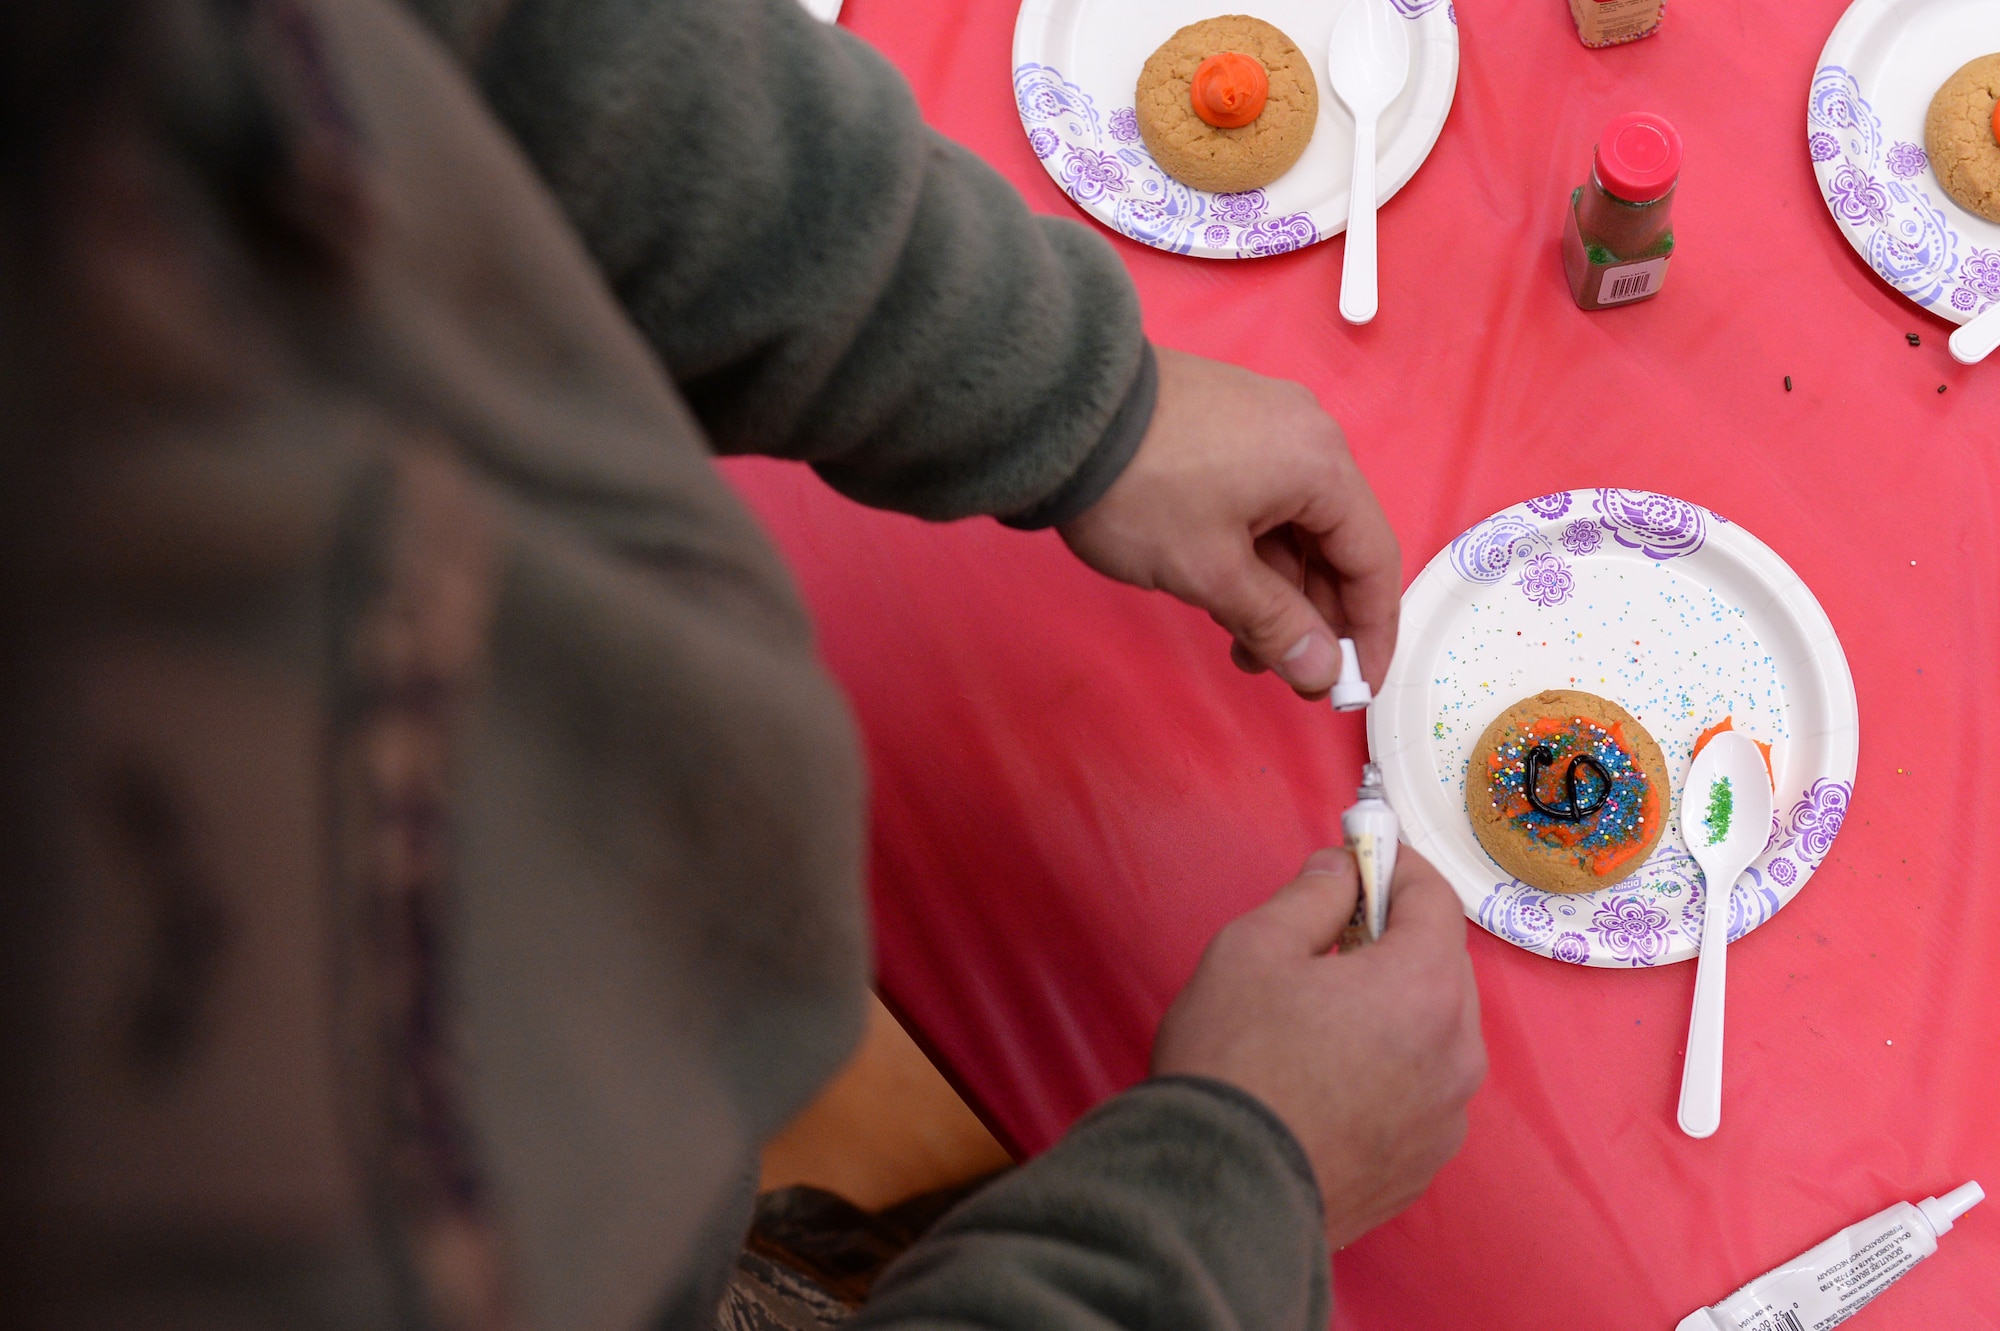 A U.S. Air Force Airman decorates a cookie during the Spangtacular Family Fall Festival Nov. 21, 2014, in the Skelton Memorial Fitness Center at Spangdahlem Air Base, Germany. The 52nd Fighter Wing Chapel hosted the event and provided free food, prizes and music. Volunteers from throughout the wing manned the activity booths. (U.S. Air Force photo by Staff Sgt. Daryl Knee/Released)